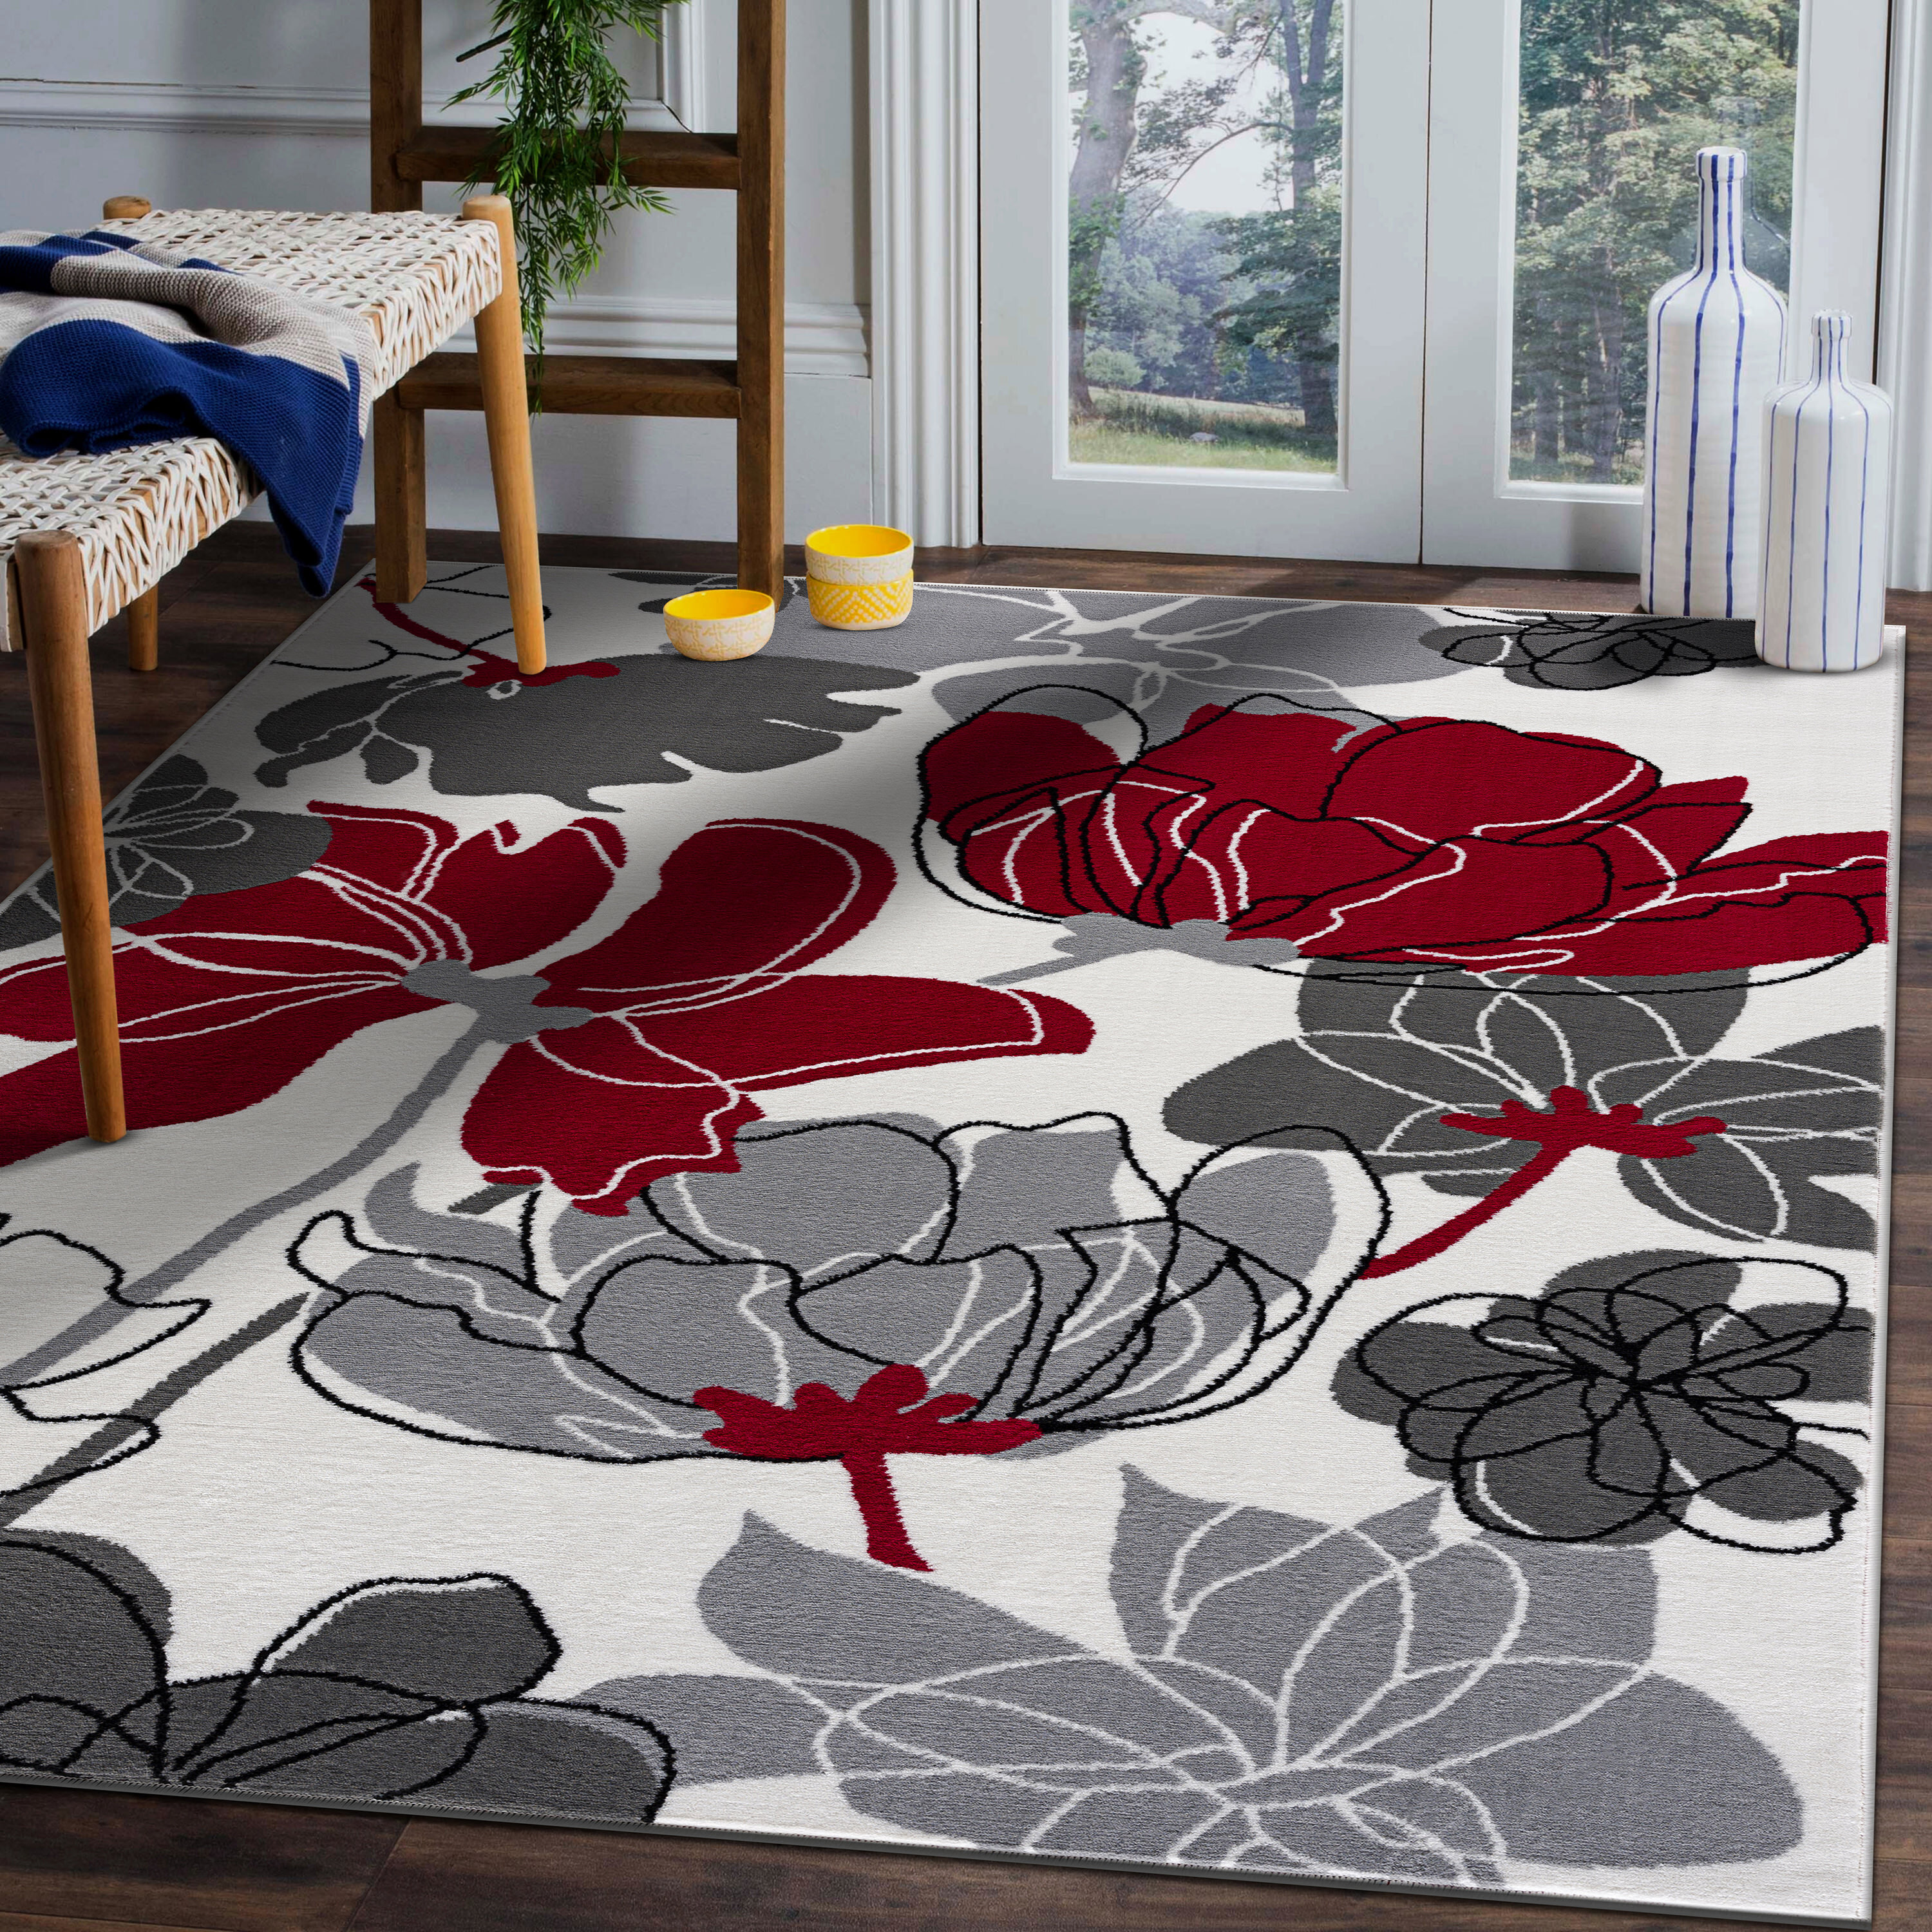 Best Selling Product] Supreme Lv Red Area Rug Living Room Rug